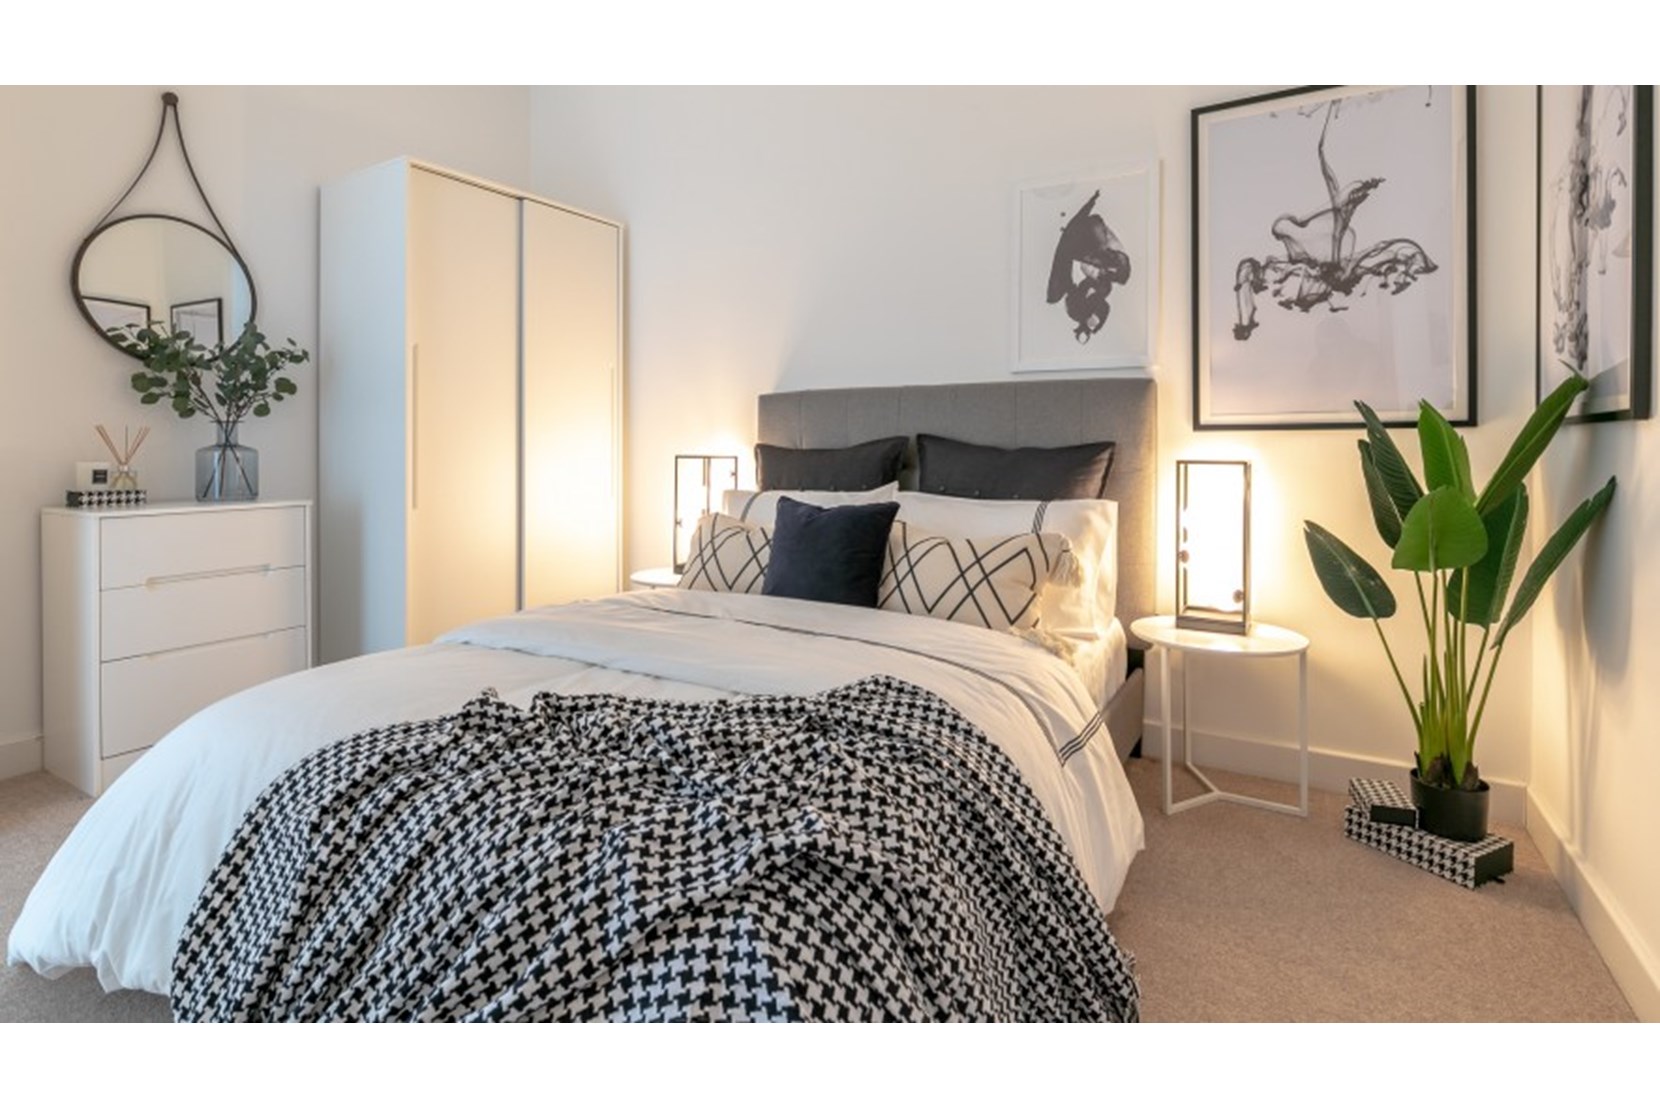 Apartments to Rent by Allsop at The Keel, Liverpool, L3, bedroom